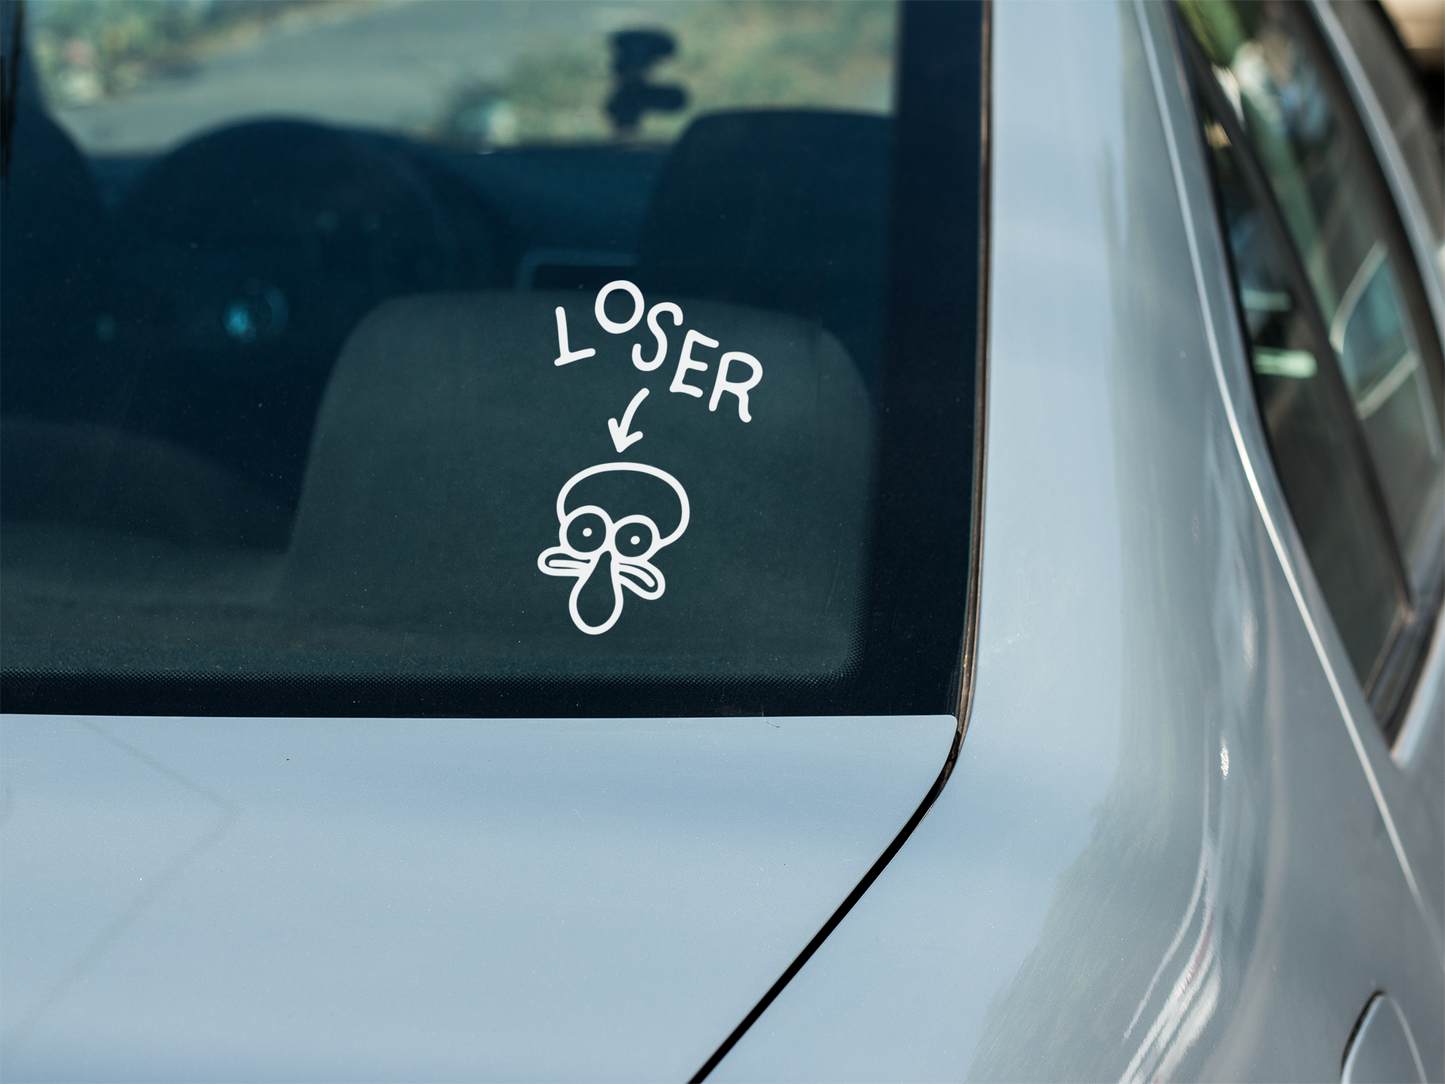 Loser - Squidward| Funny Stickers , Decal for car laptop window 6"